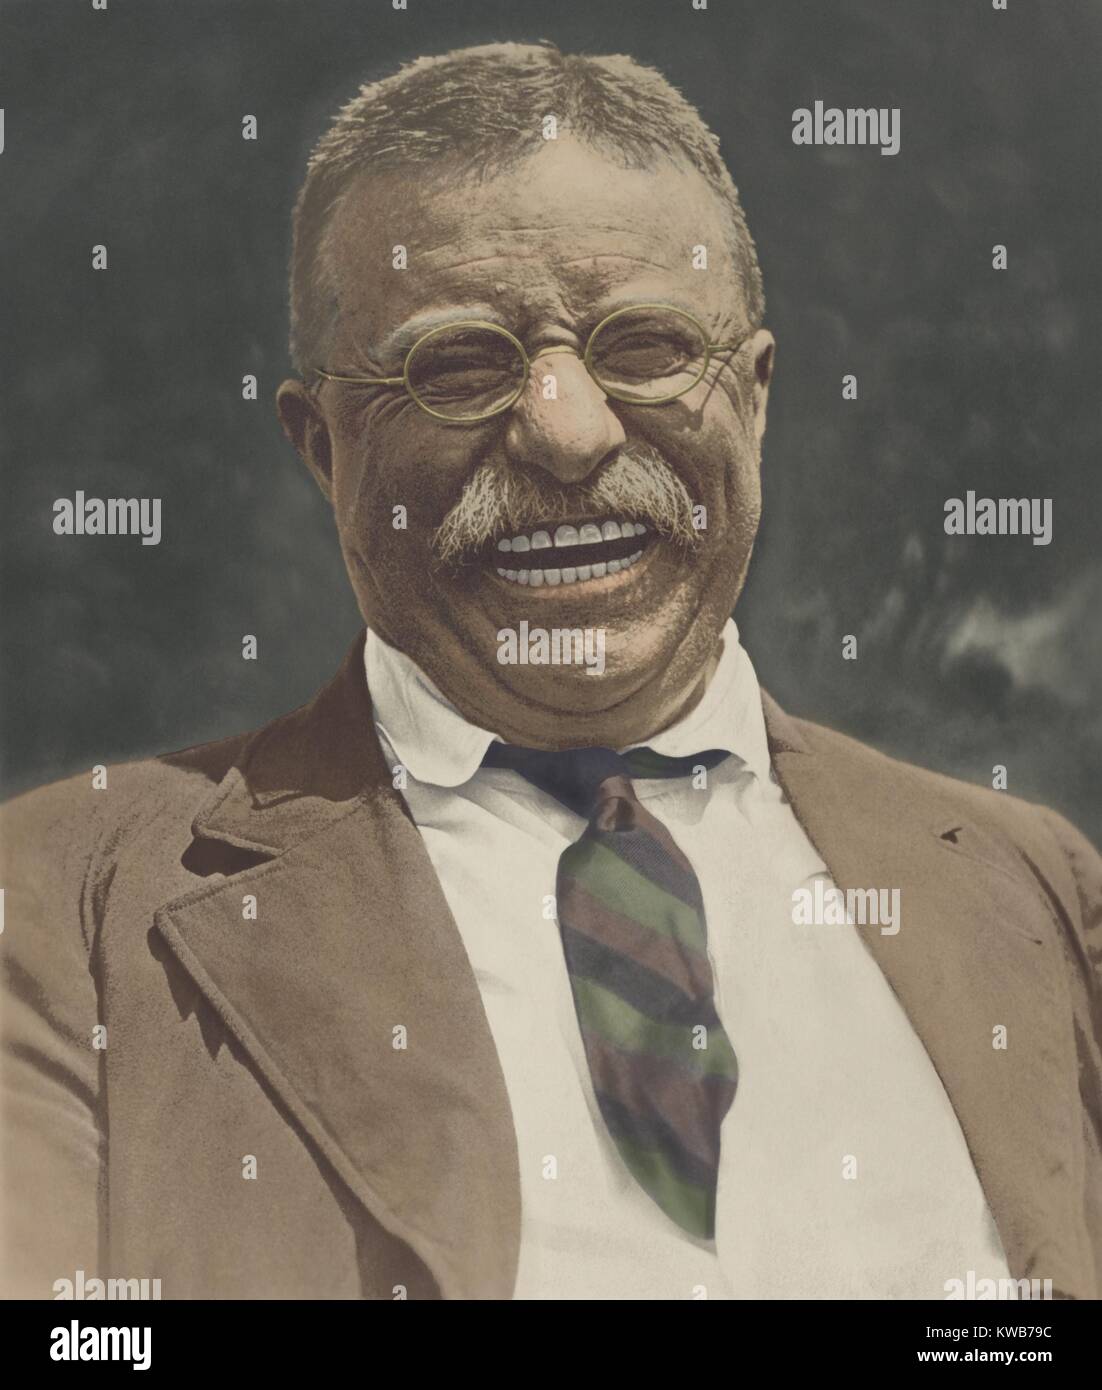 Theodore Roosevelt laughing, c. 1910-1912. Roosevelt returned from his post-presidential African safari to adoring crowds on June 18, 1910. He soon re-entered the public arena with a speaking tour in the Midwest. By early 1911 he began to challenge Presid (BSIC 2016 9 12). 7 Continents History/Everett Collection Stock Photo